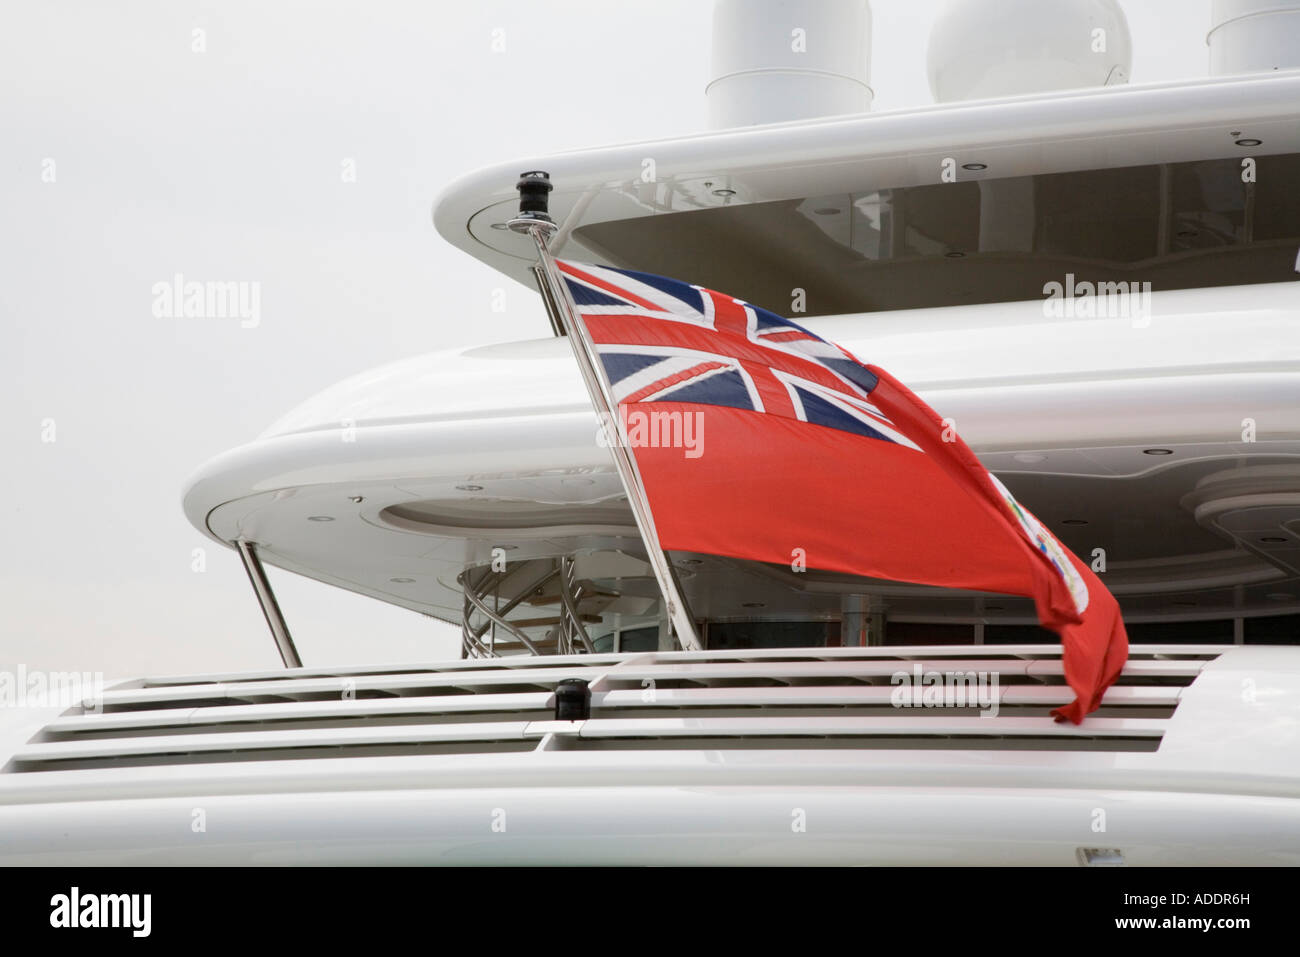 The British Red Ensign flag of the Royal Merchant Navy flies on the stern of a luxury yacht Stock Photo